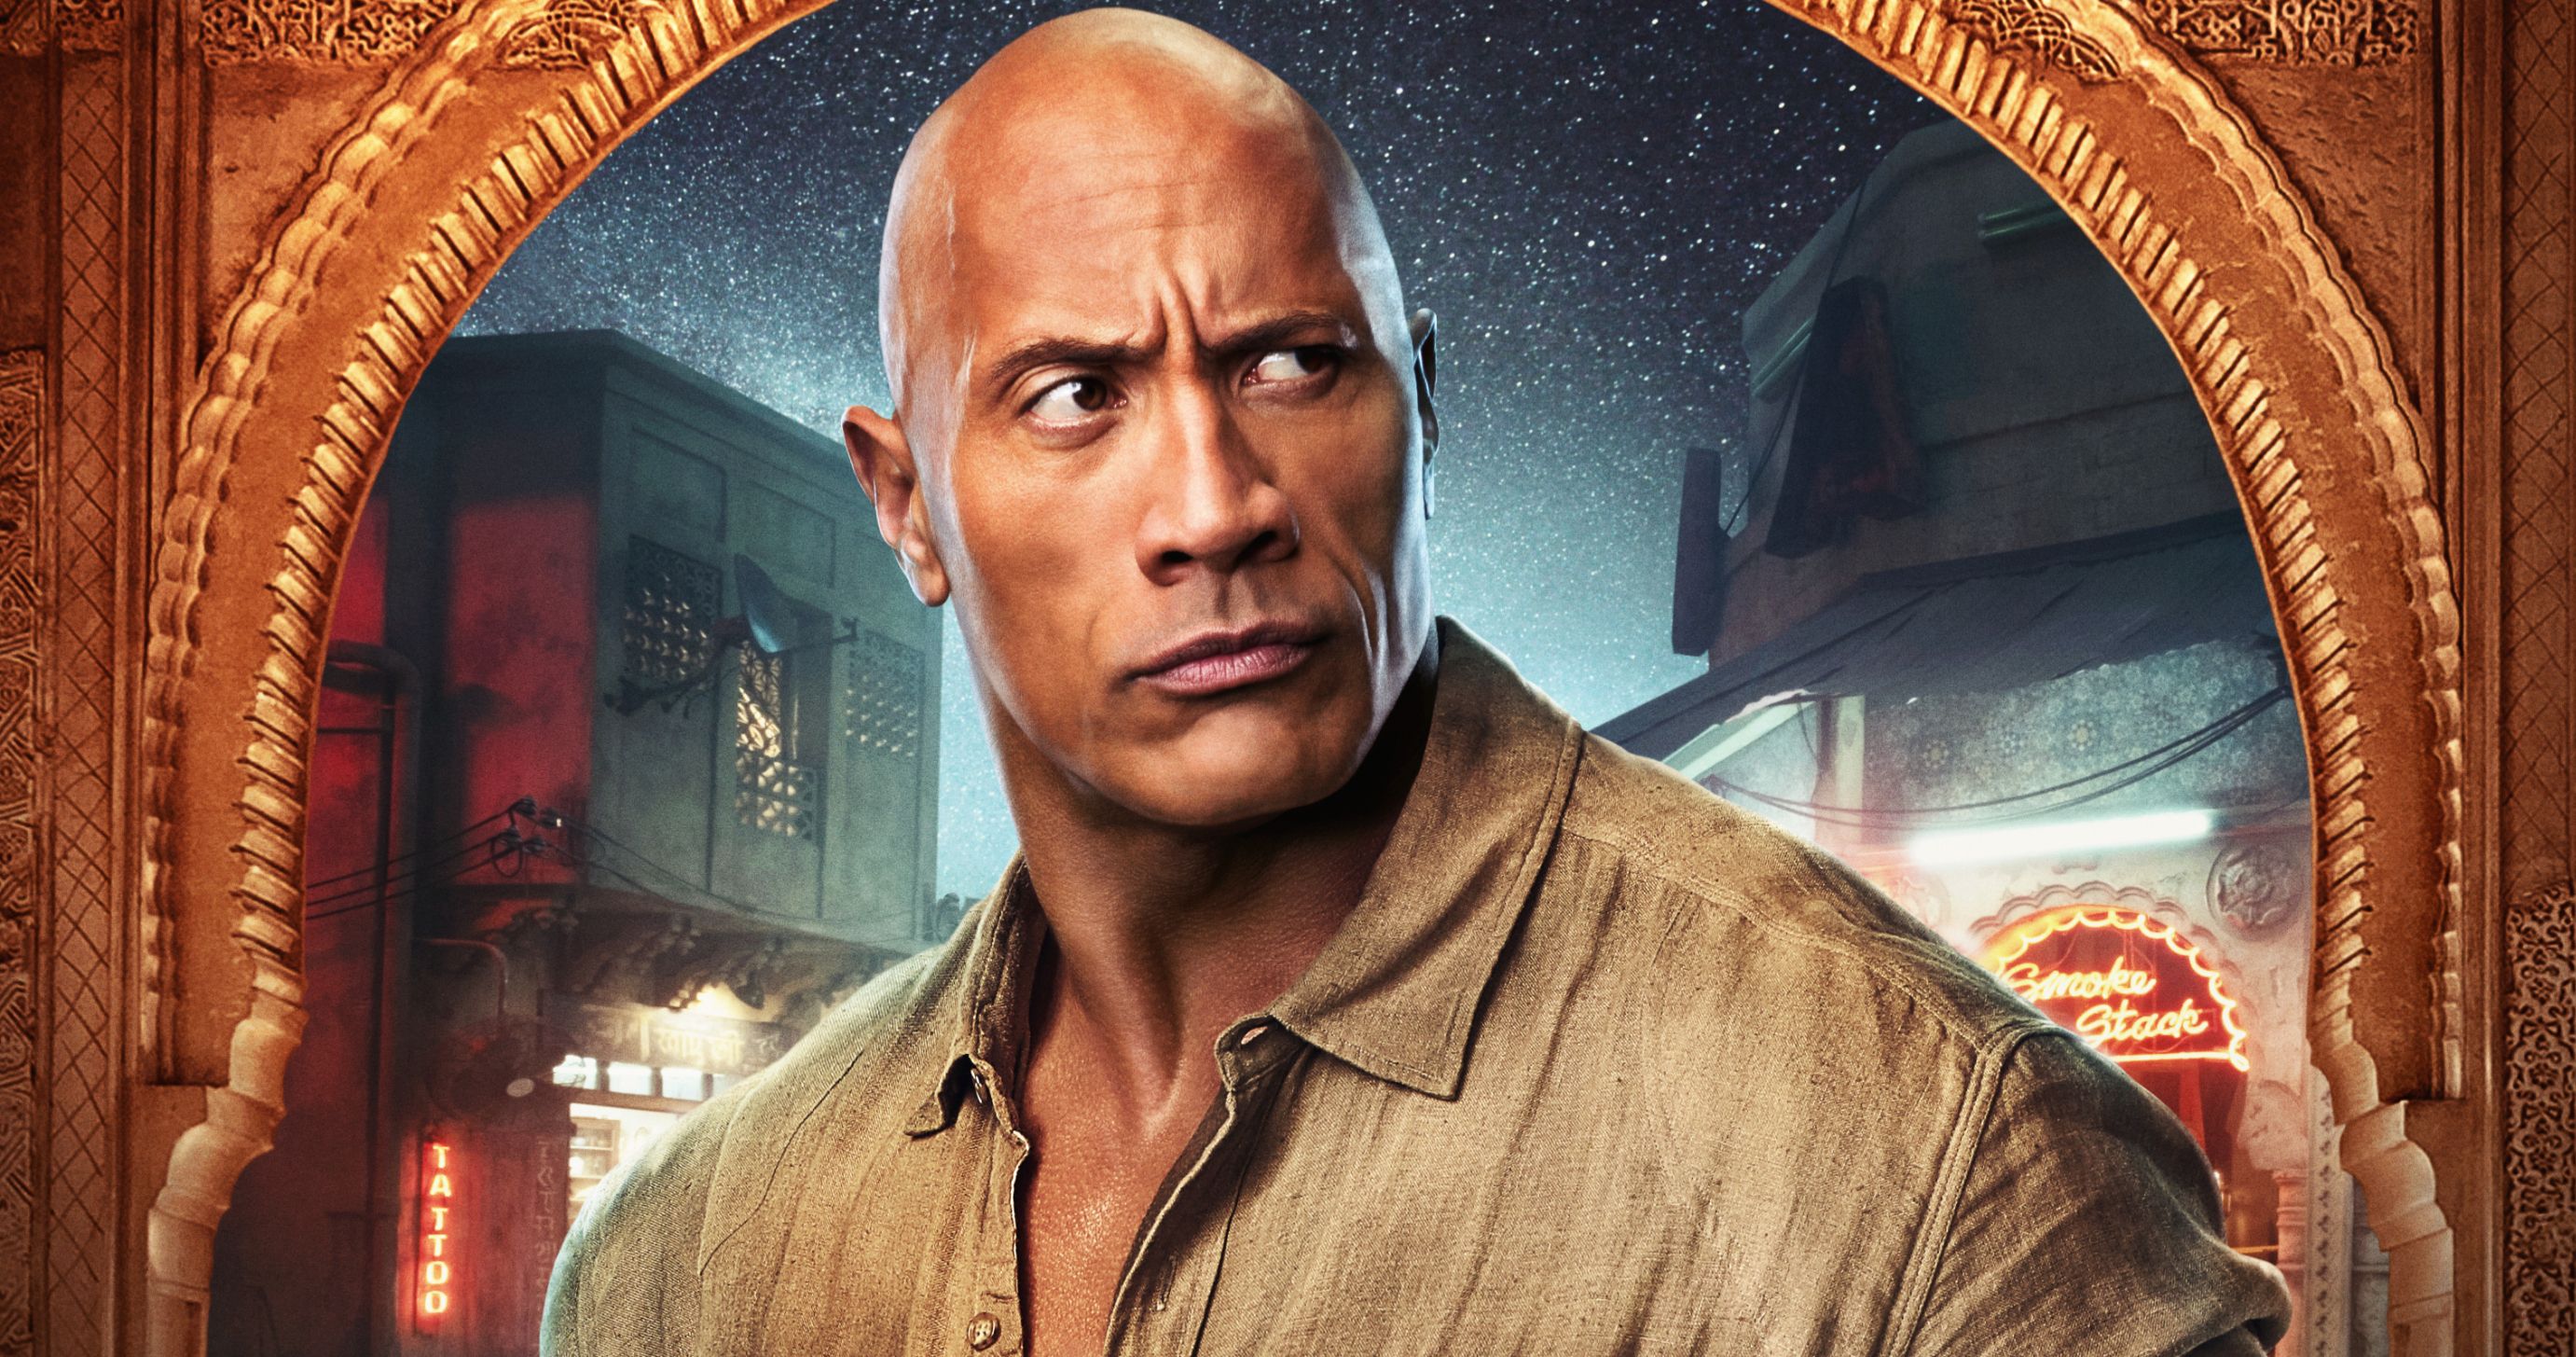 Jumanji 3 Character Posters Have the Gang Ready for The Next Level